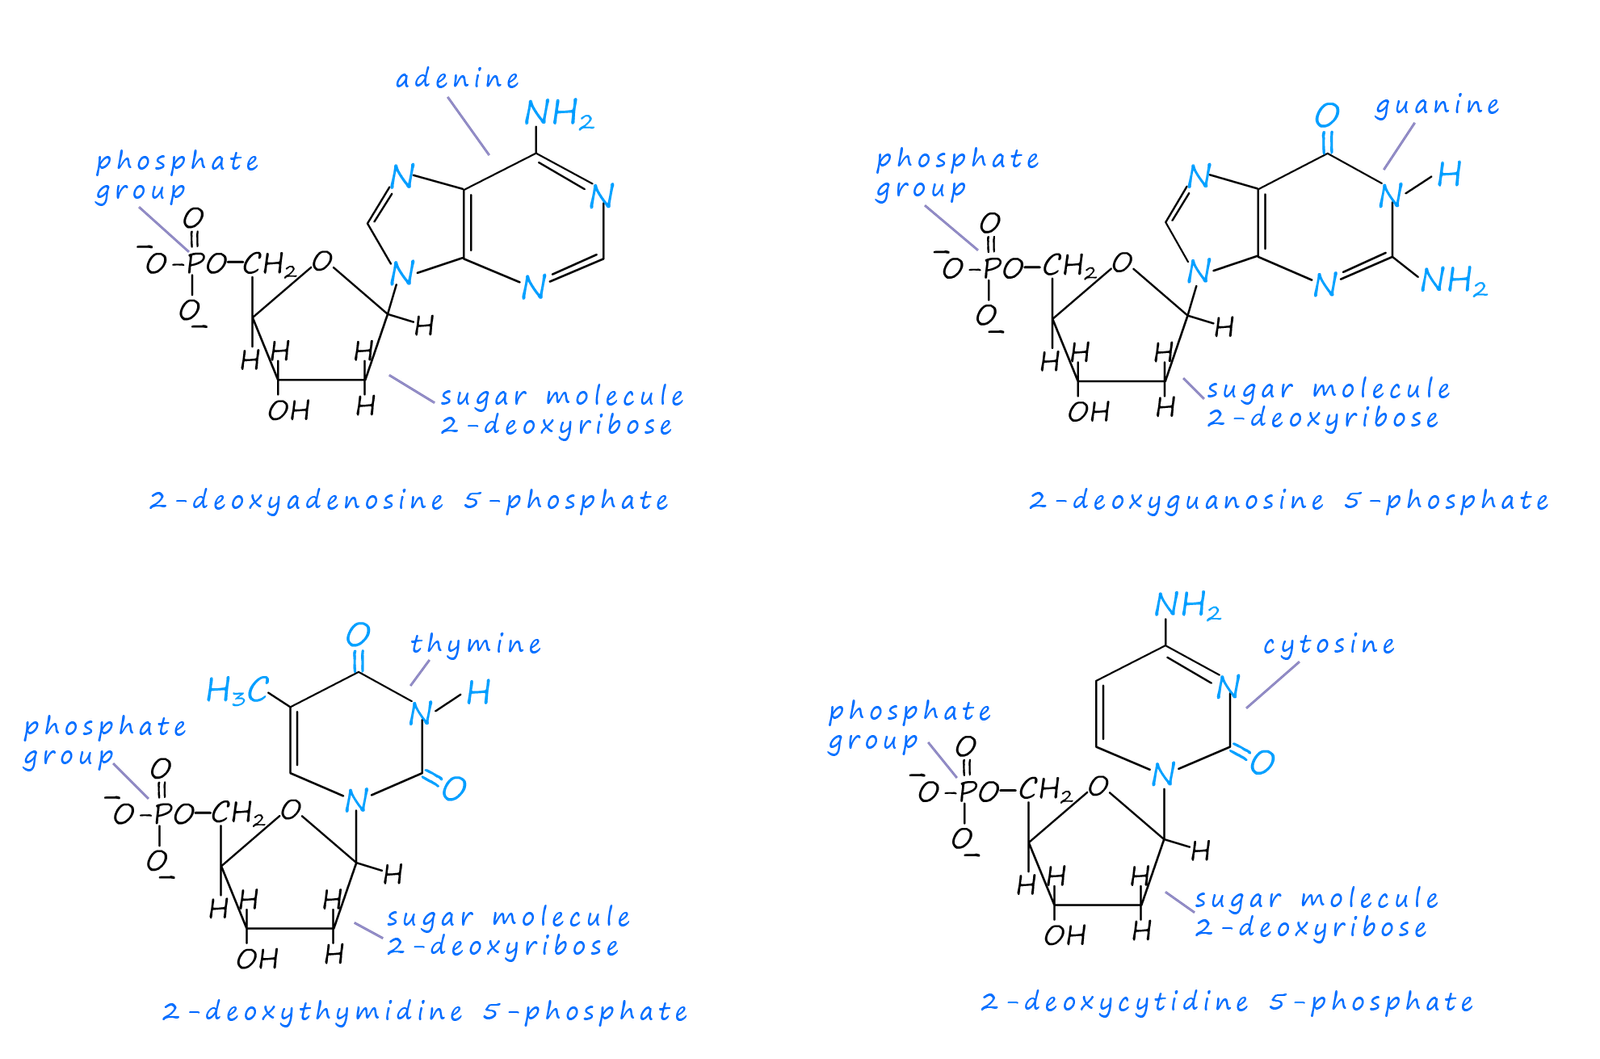 struture of the 4 possible nucleotides in DNA